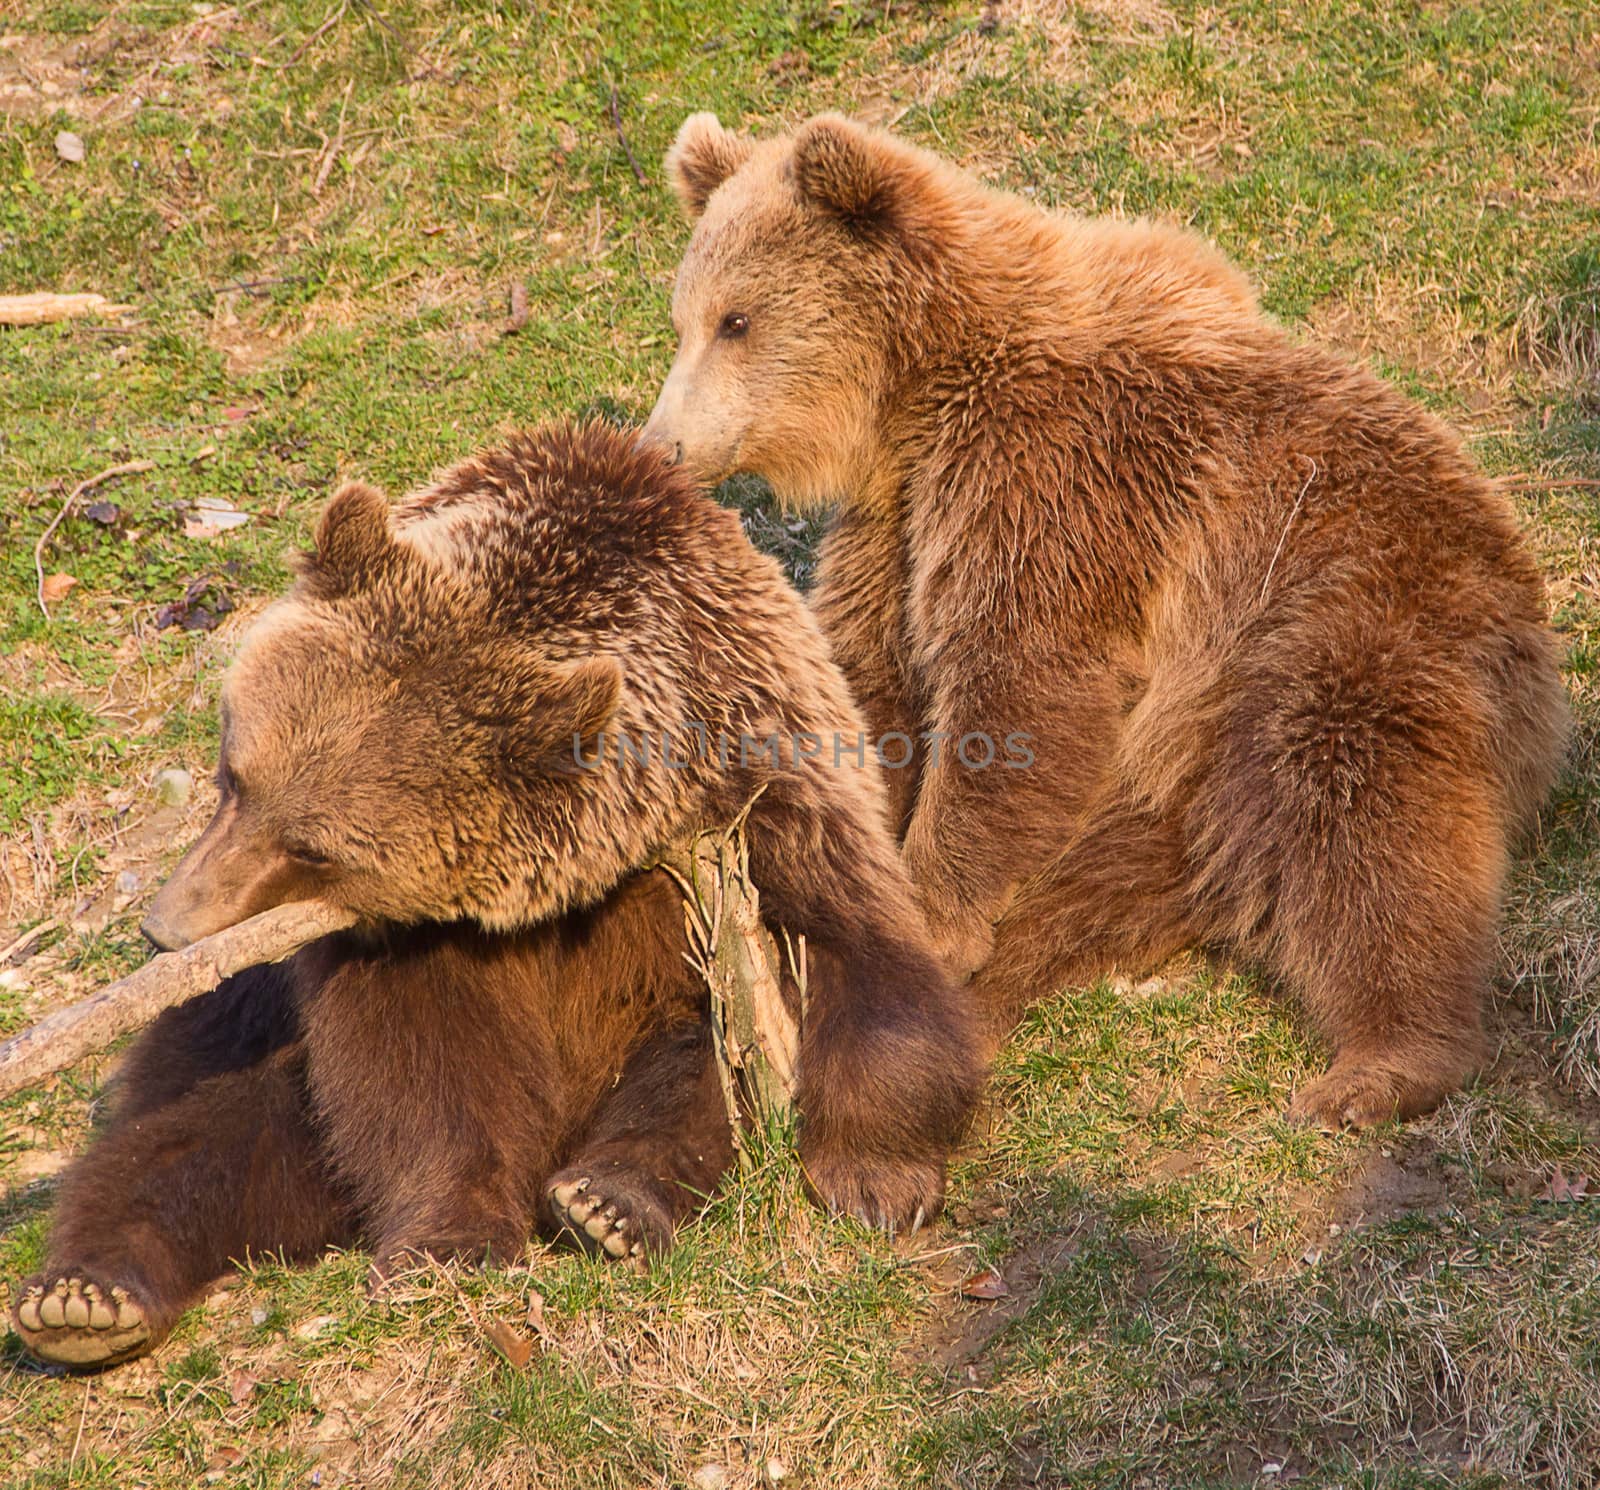 Brown bear and cub by swisshippo